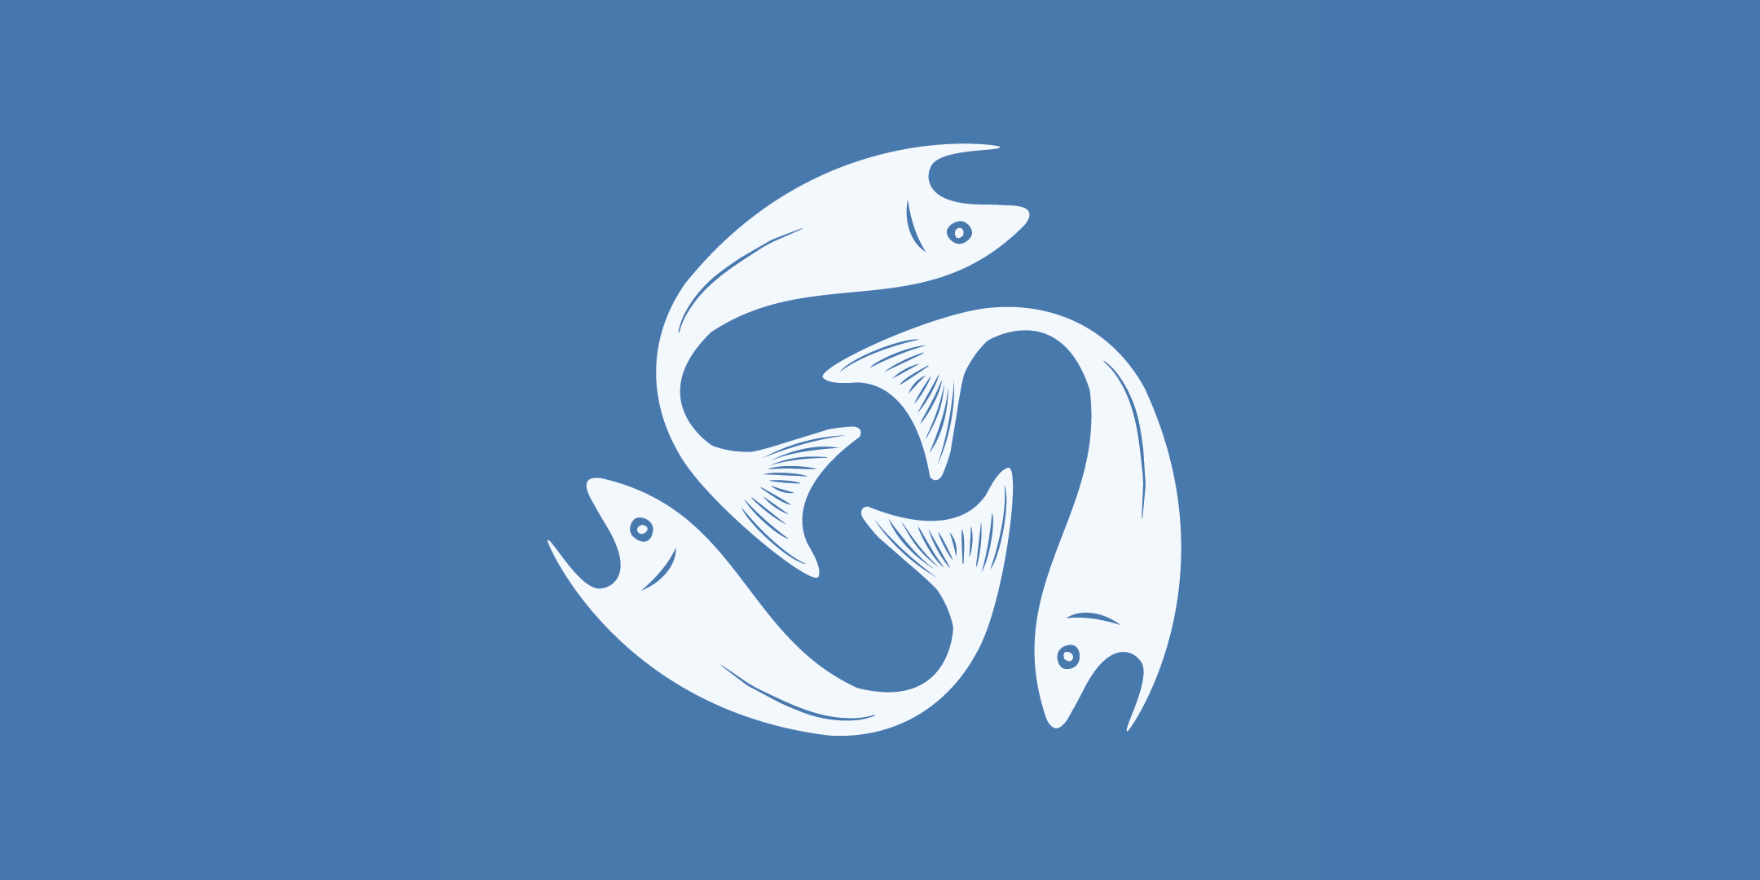 Three salmon fish in white in a circular design on a blue background